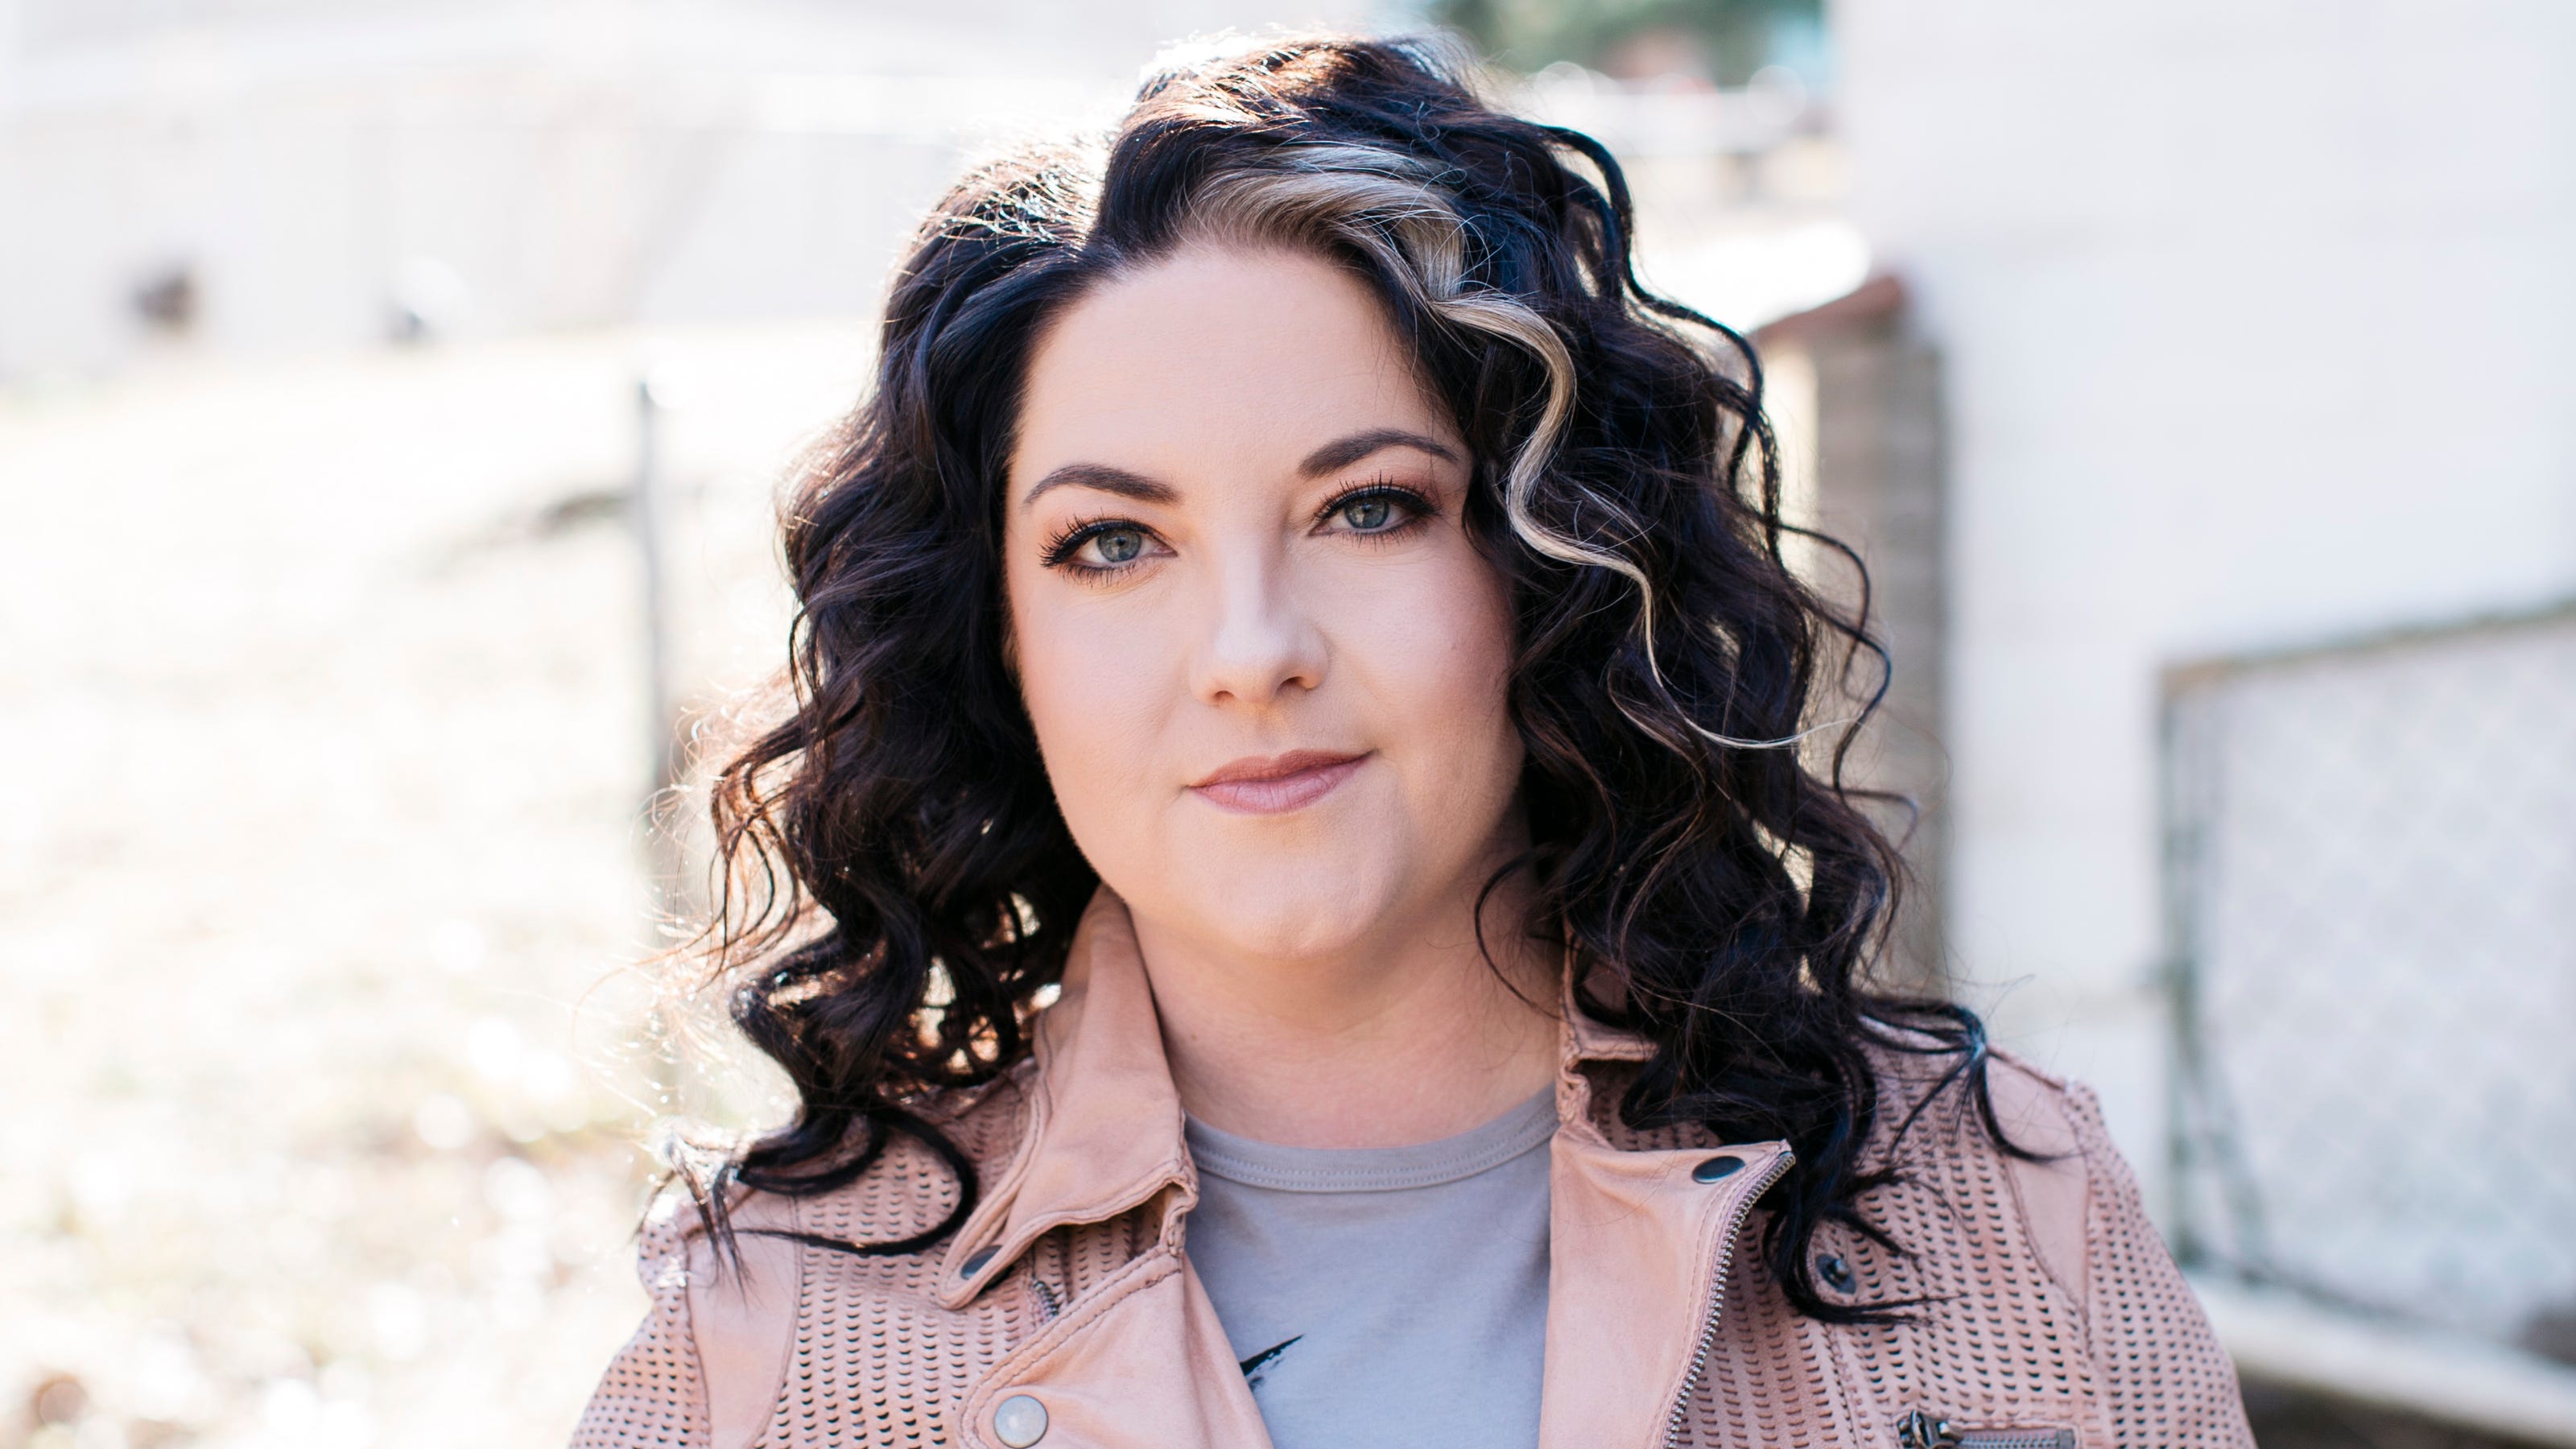 Ashley McBryde interview New album 'Never Will' is compelling, cathartic